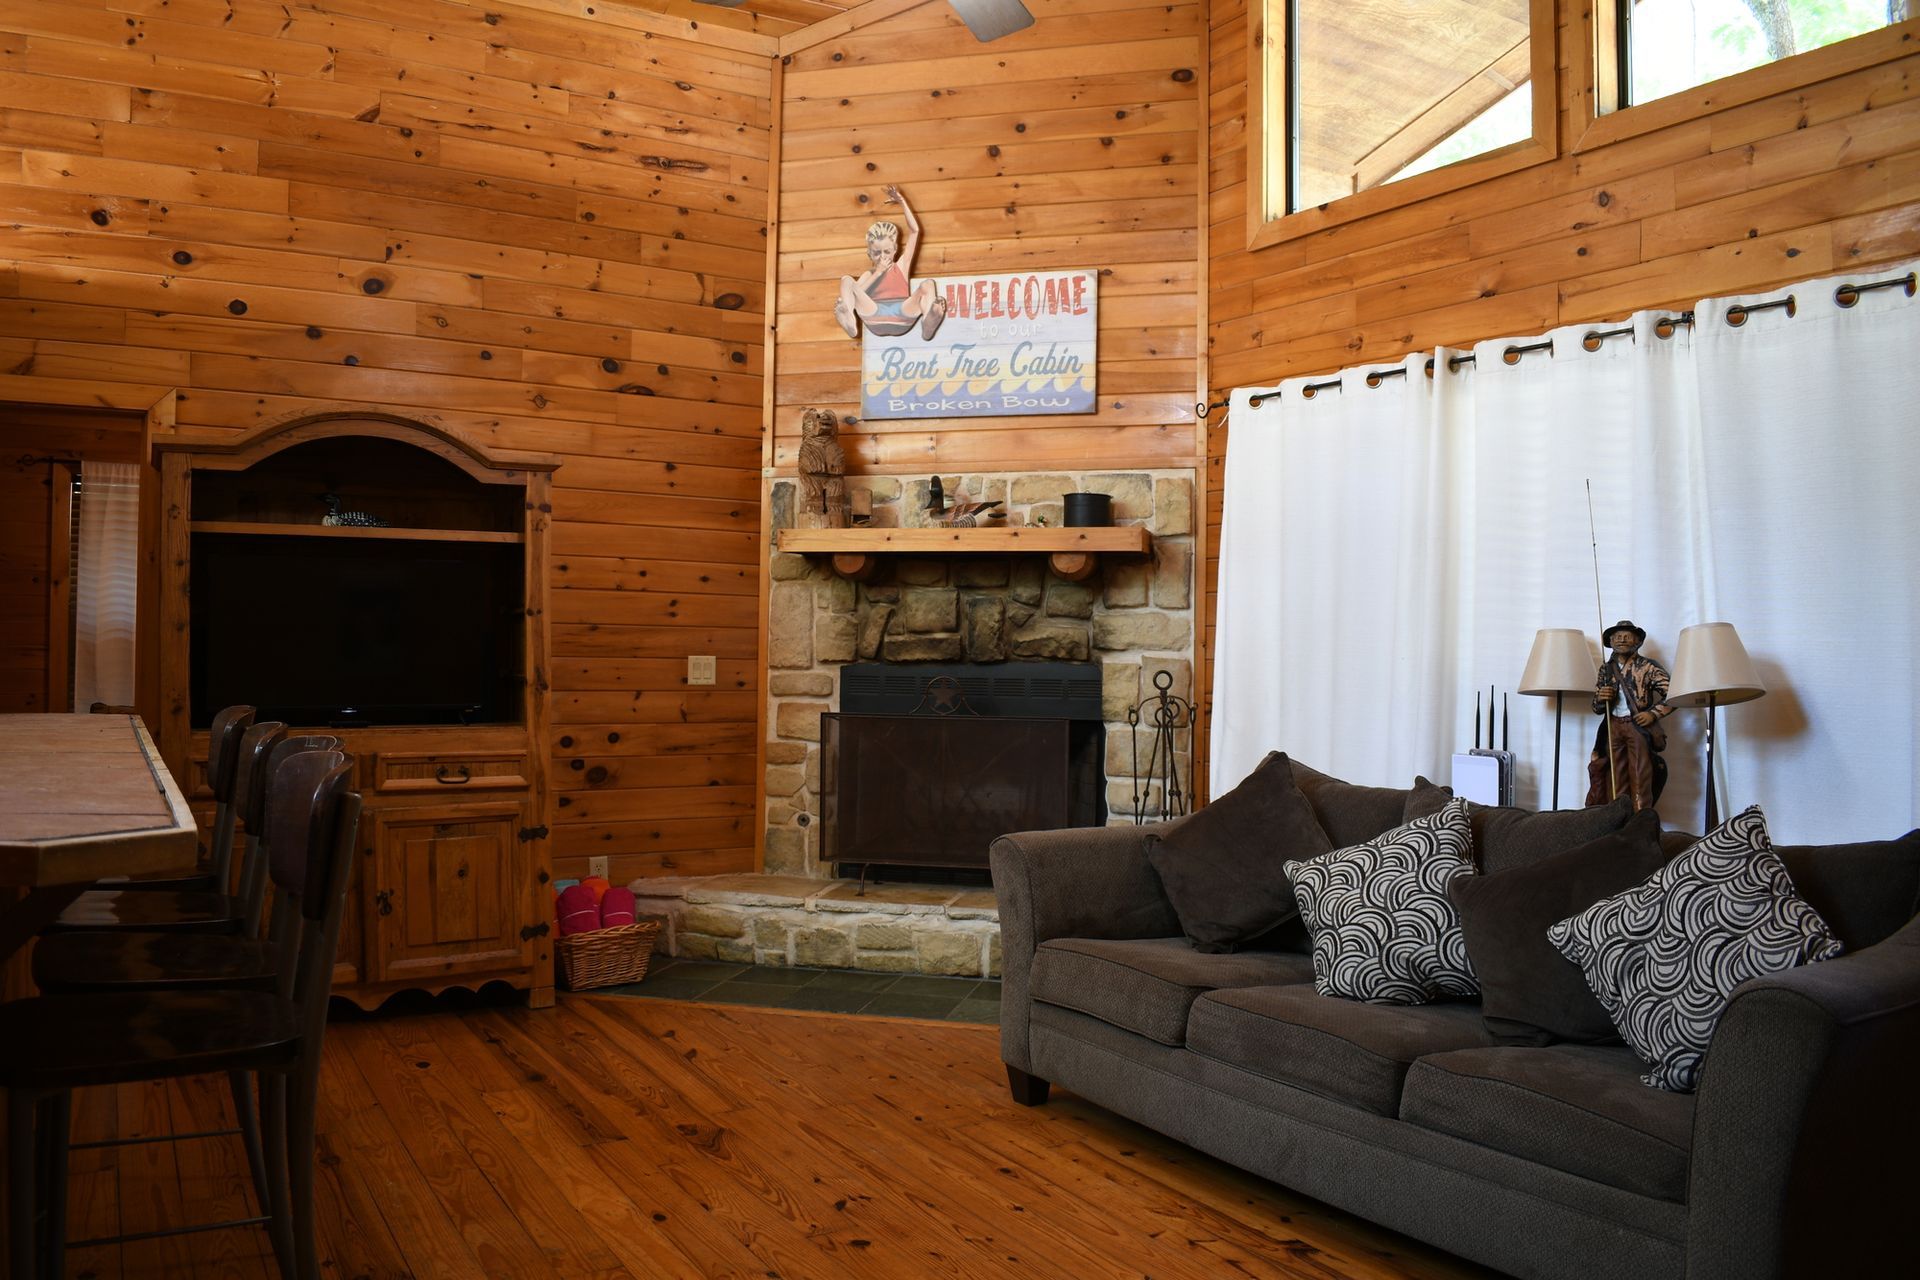 A living room in a log cabin with a couch , fireplace and television.